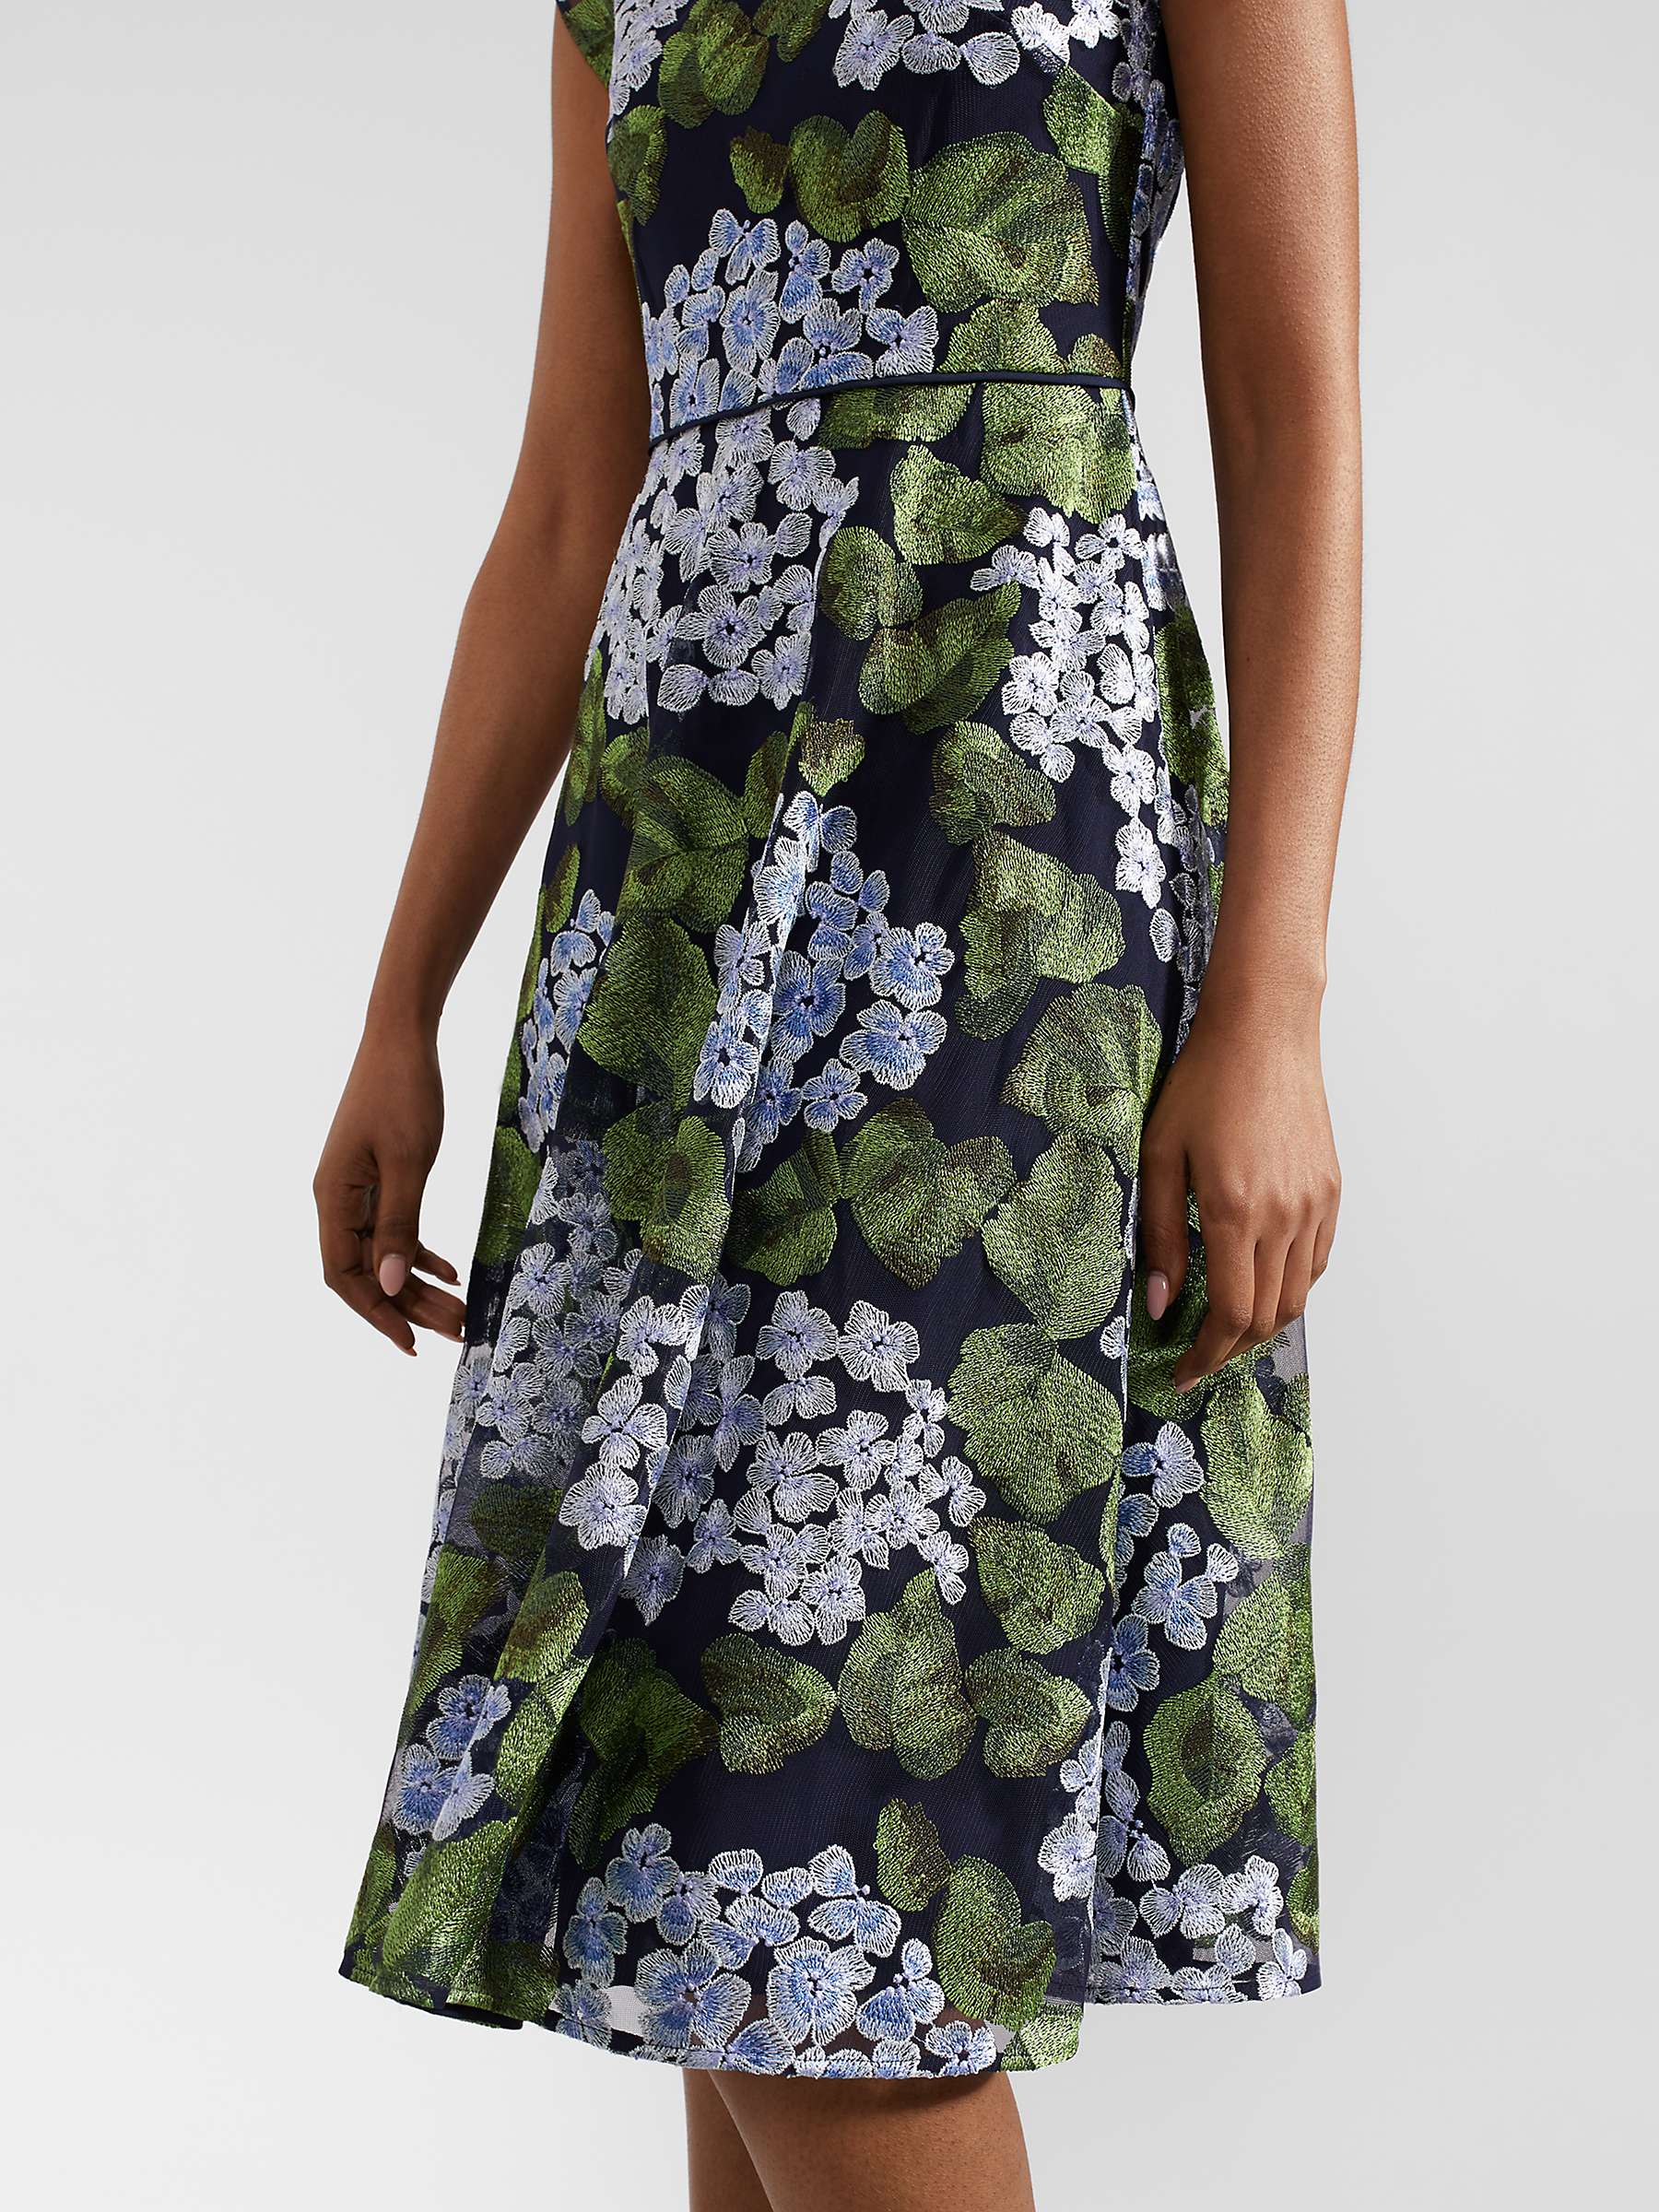 Buy Hobbs Tia Floral Embroidery Dress, Navy/Multi Online at johnlewis.com